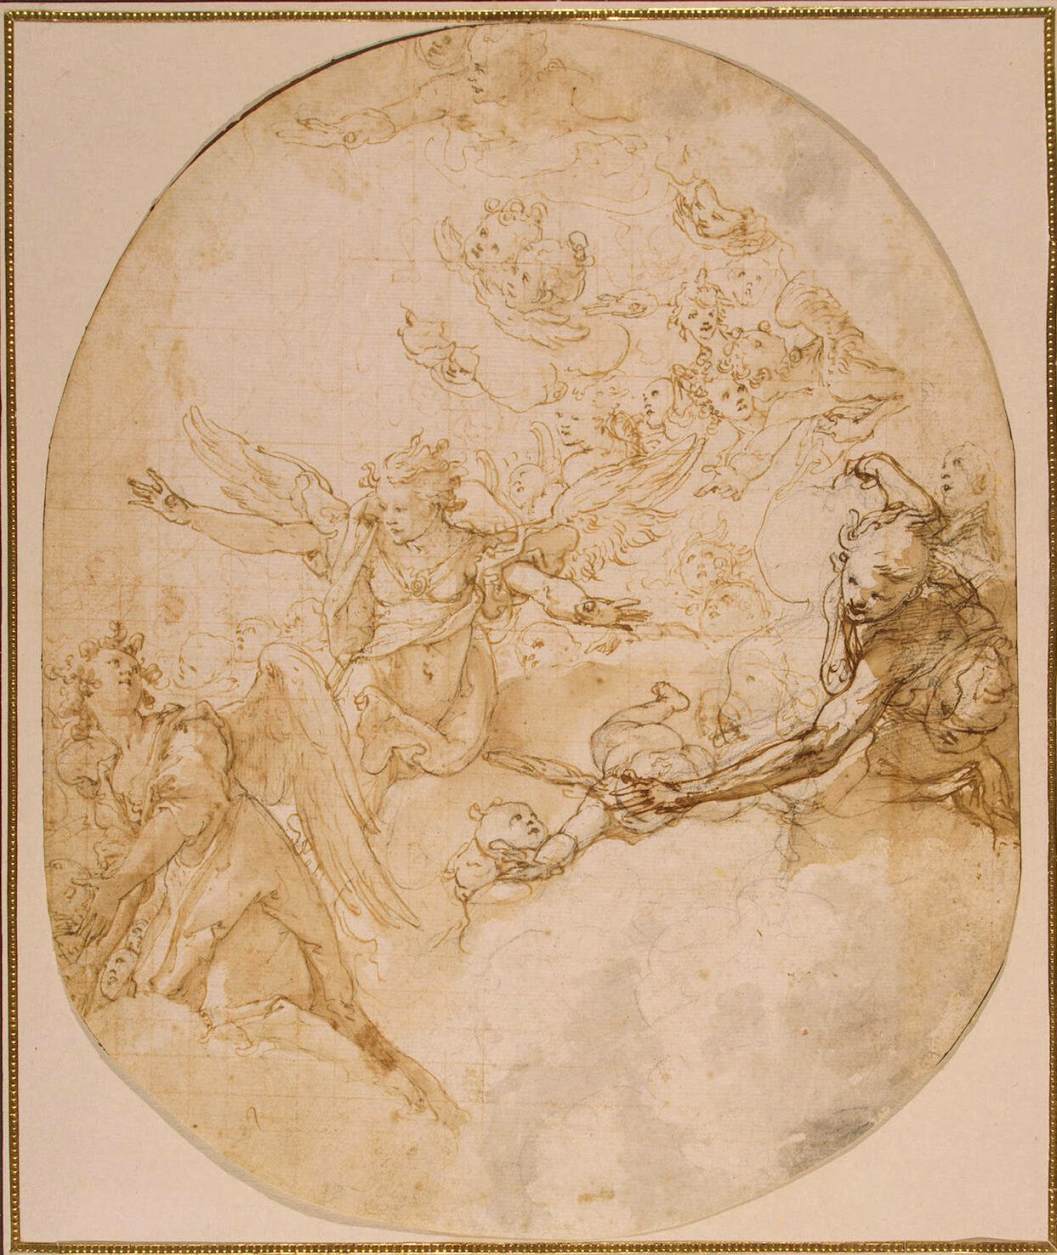 Collections of Drawings antique (947).jpg